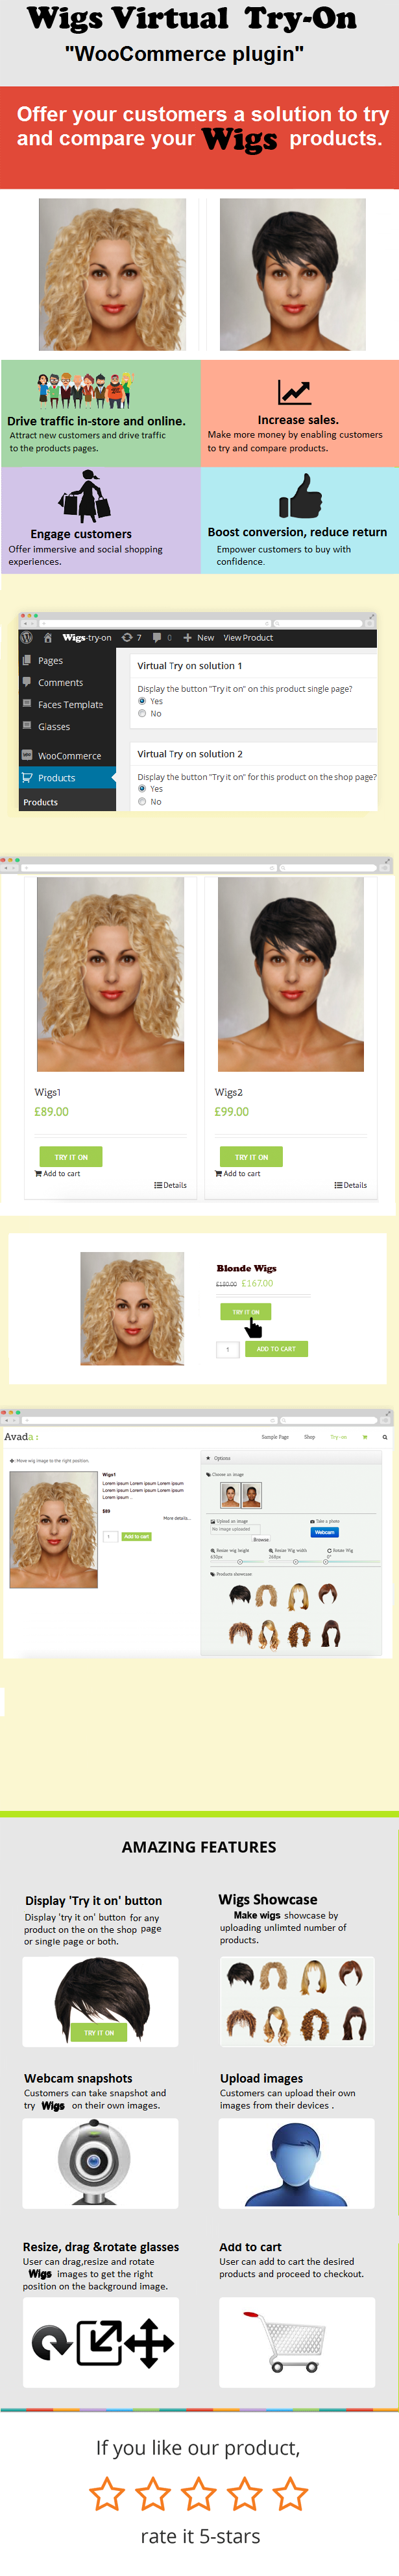 WooCommerce Wigs Virtual Try-On - 1